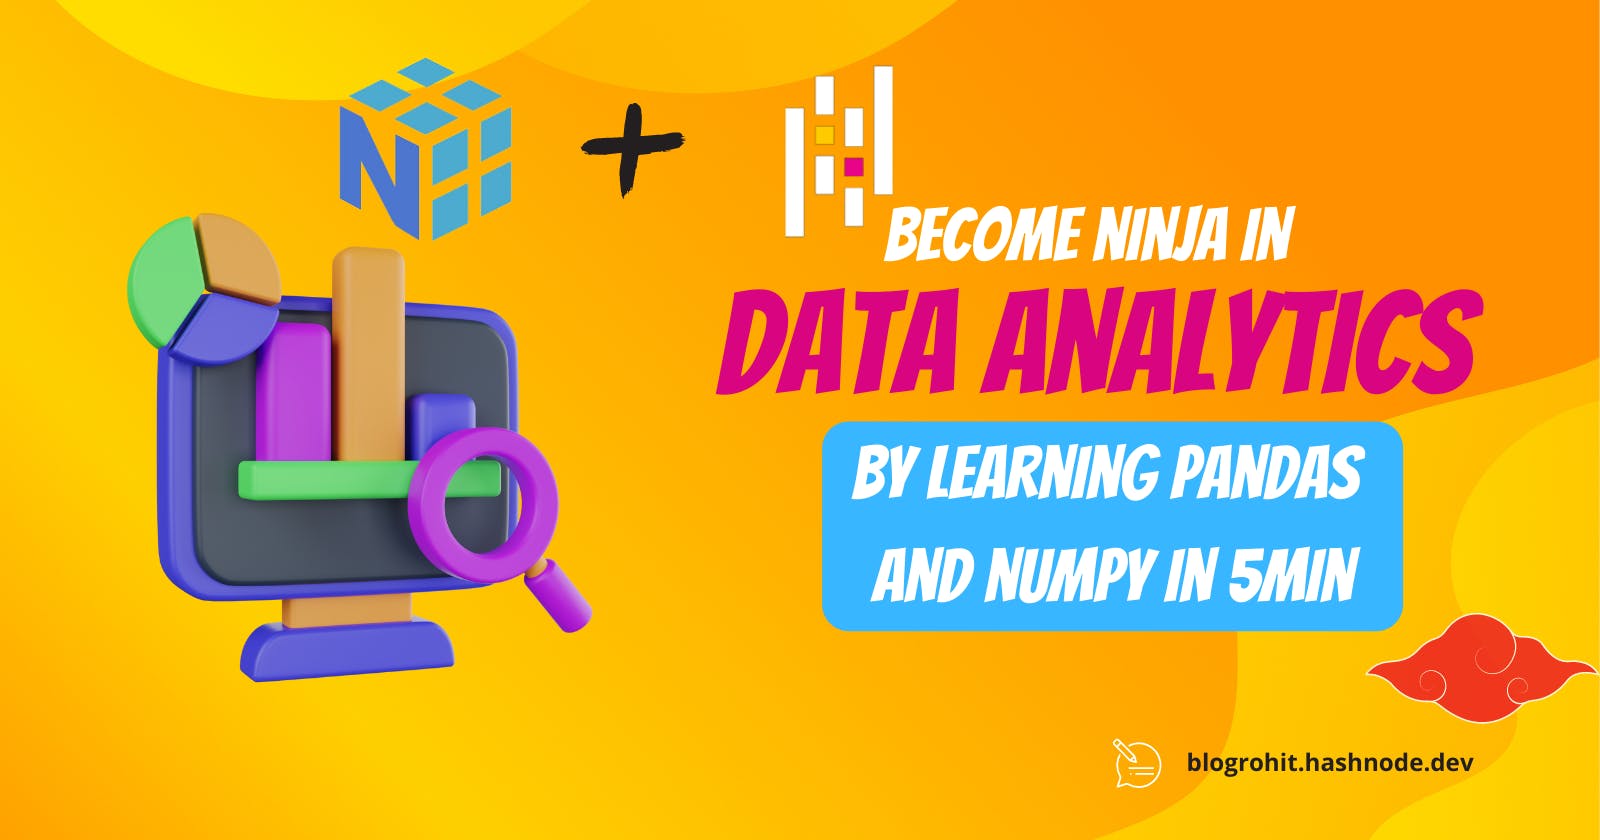 Learn Pandas And Numpy in 5 mins